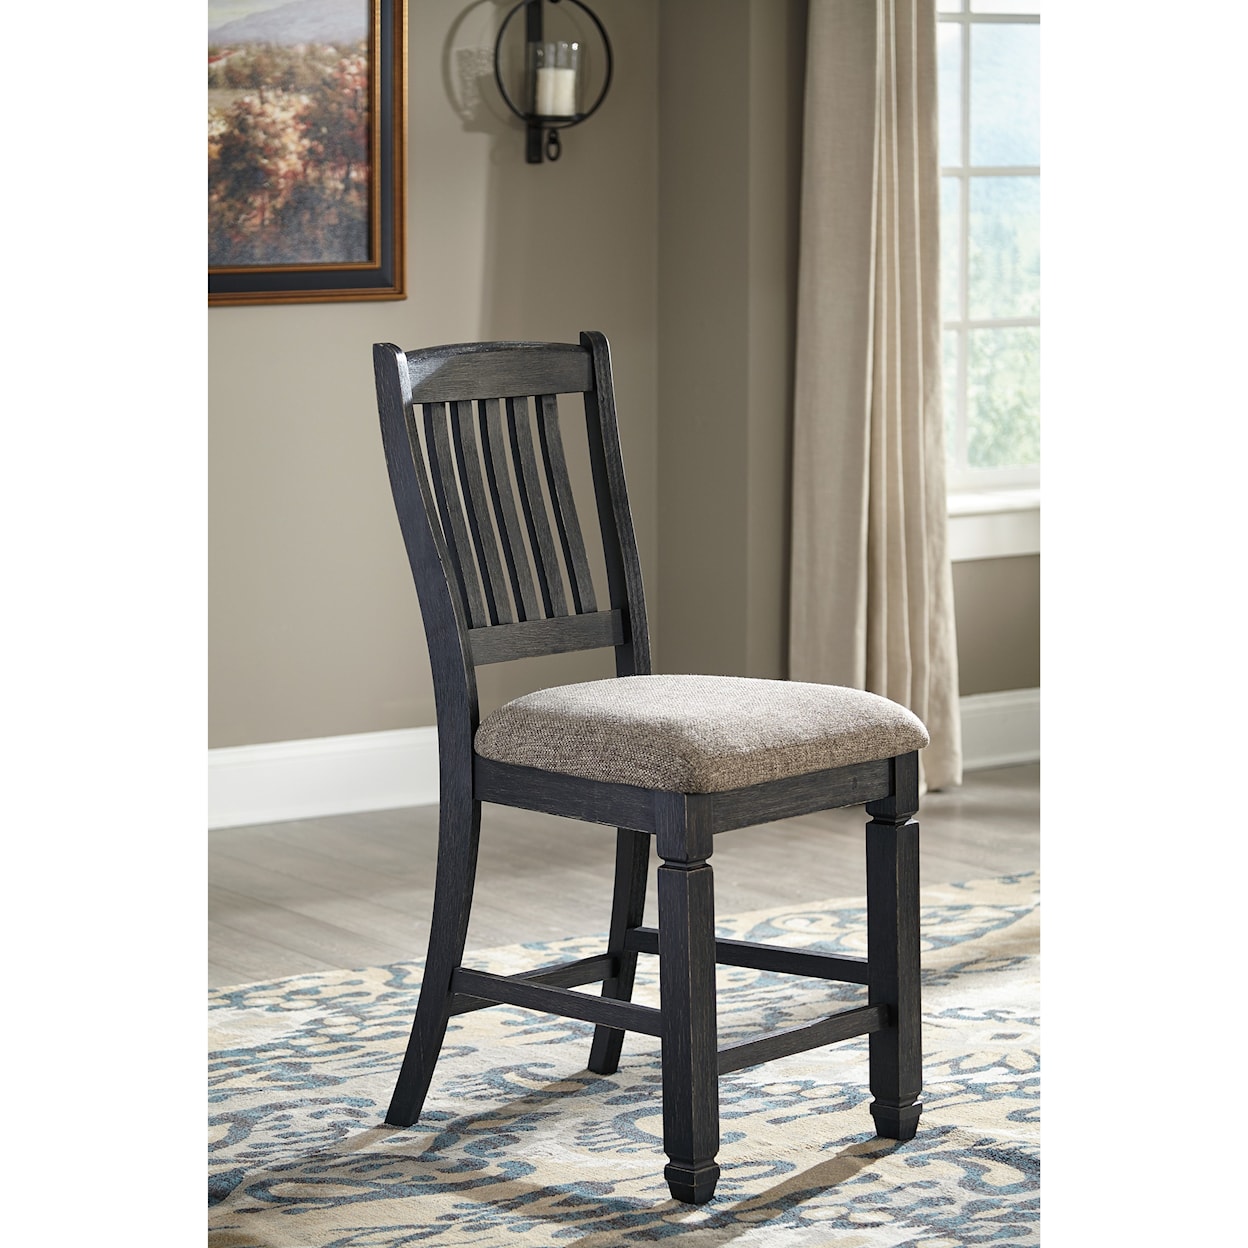 Signature Tyler Creek 5-Piece Counter Table and Stool Set